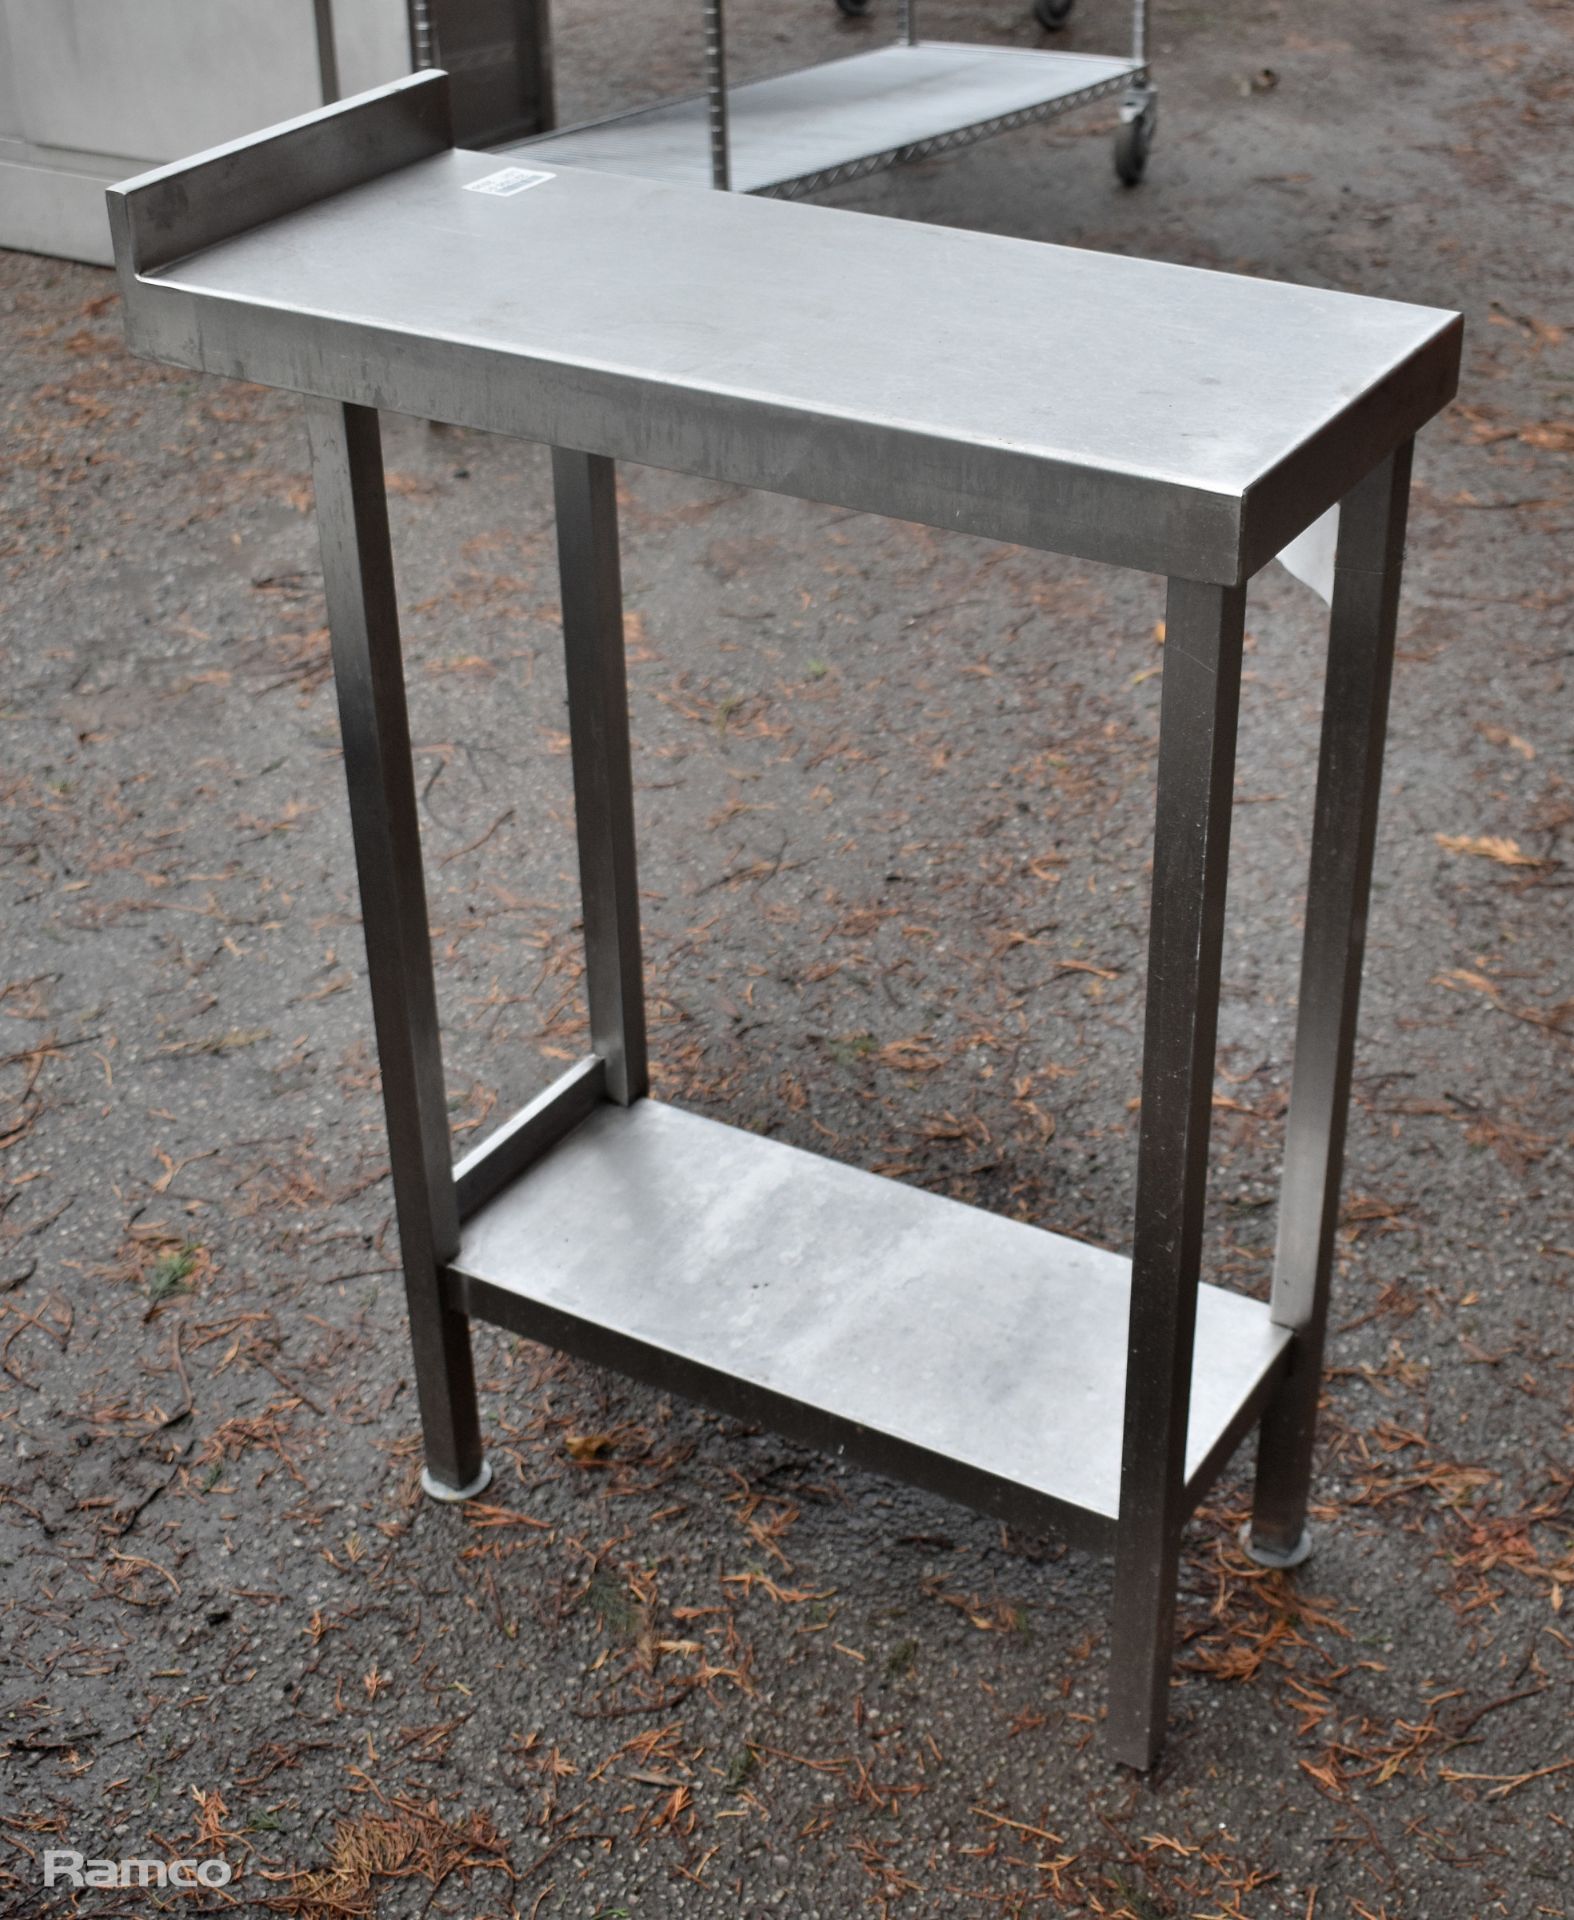 Stainless steel table with 1 x shelf - Image 2 of 3